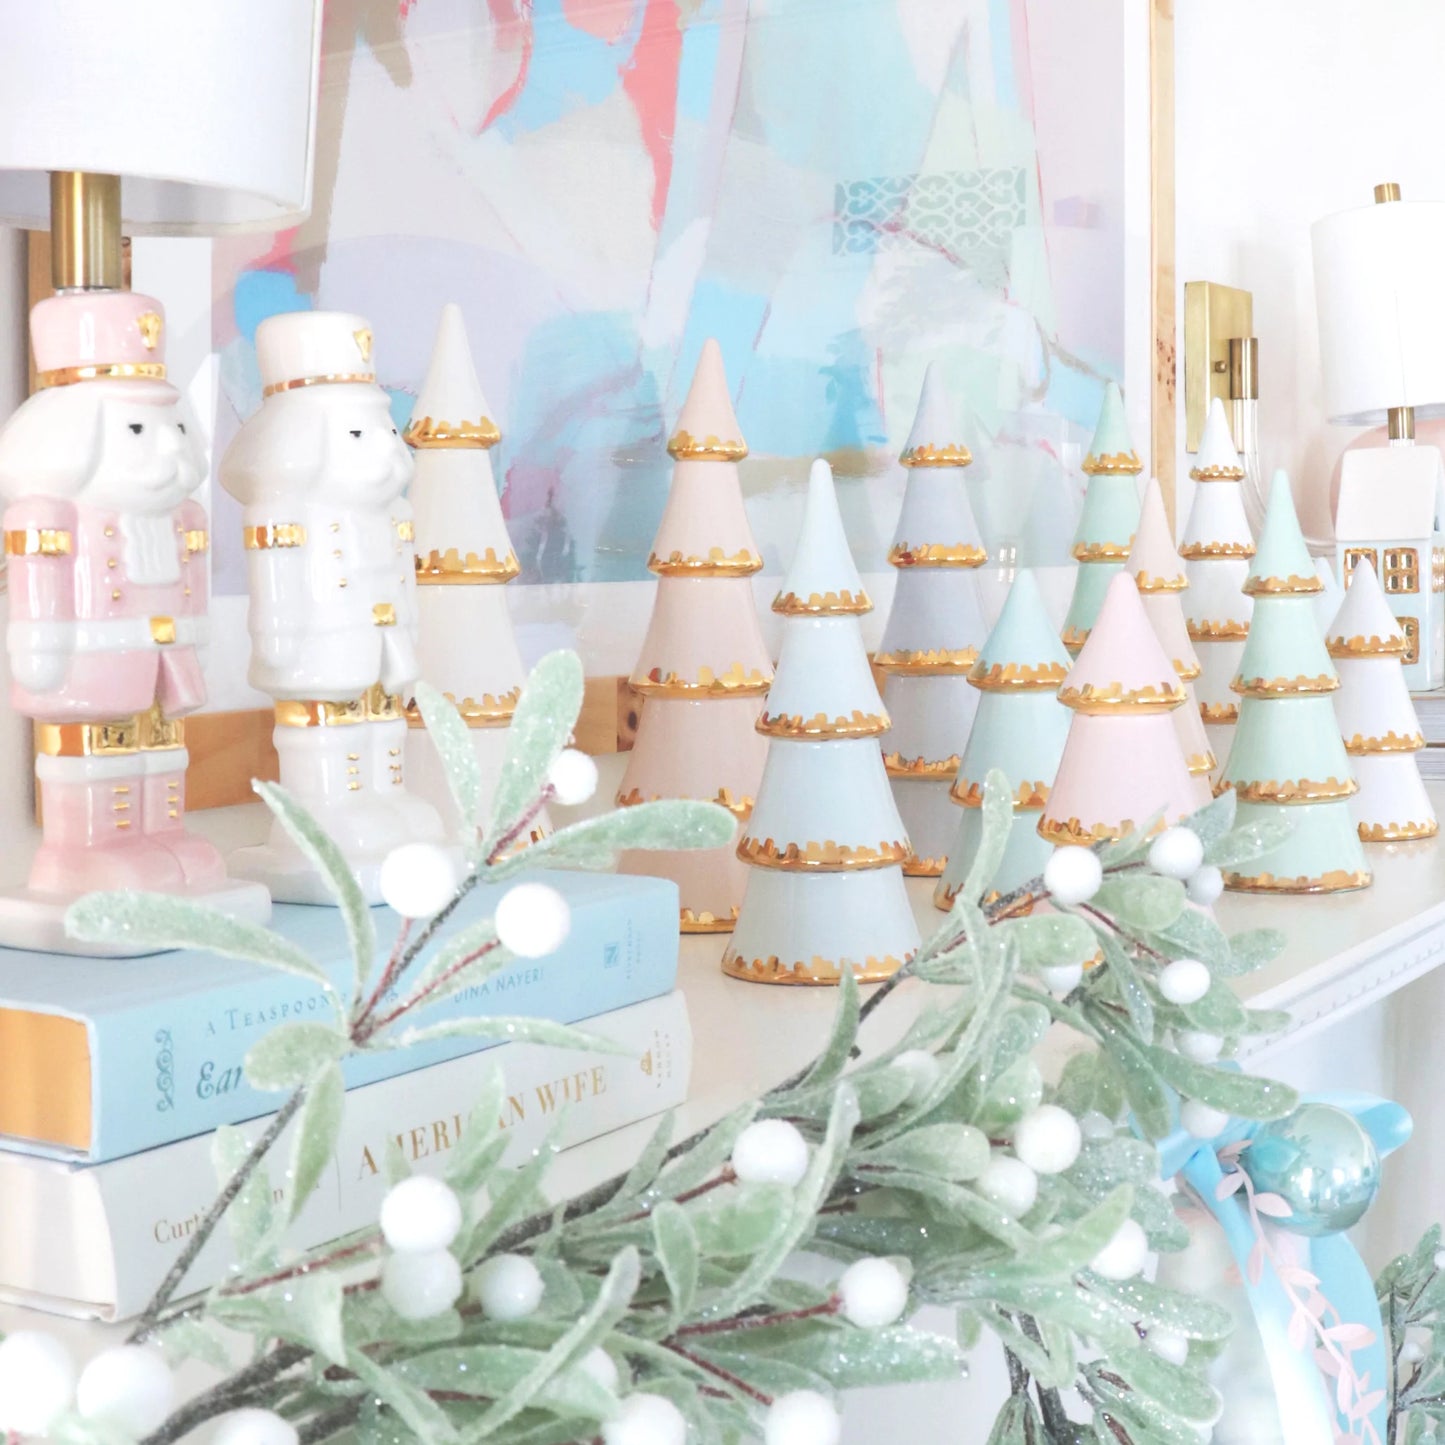 Aqua Christmas Trees with 22K Gold Brushstroke Accent